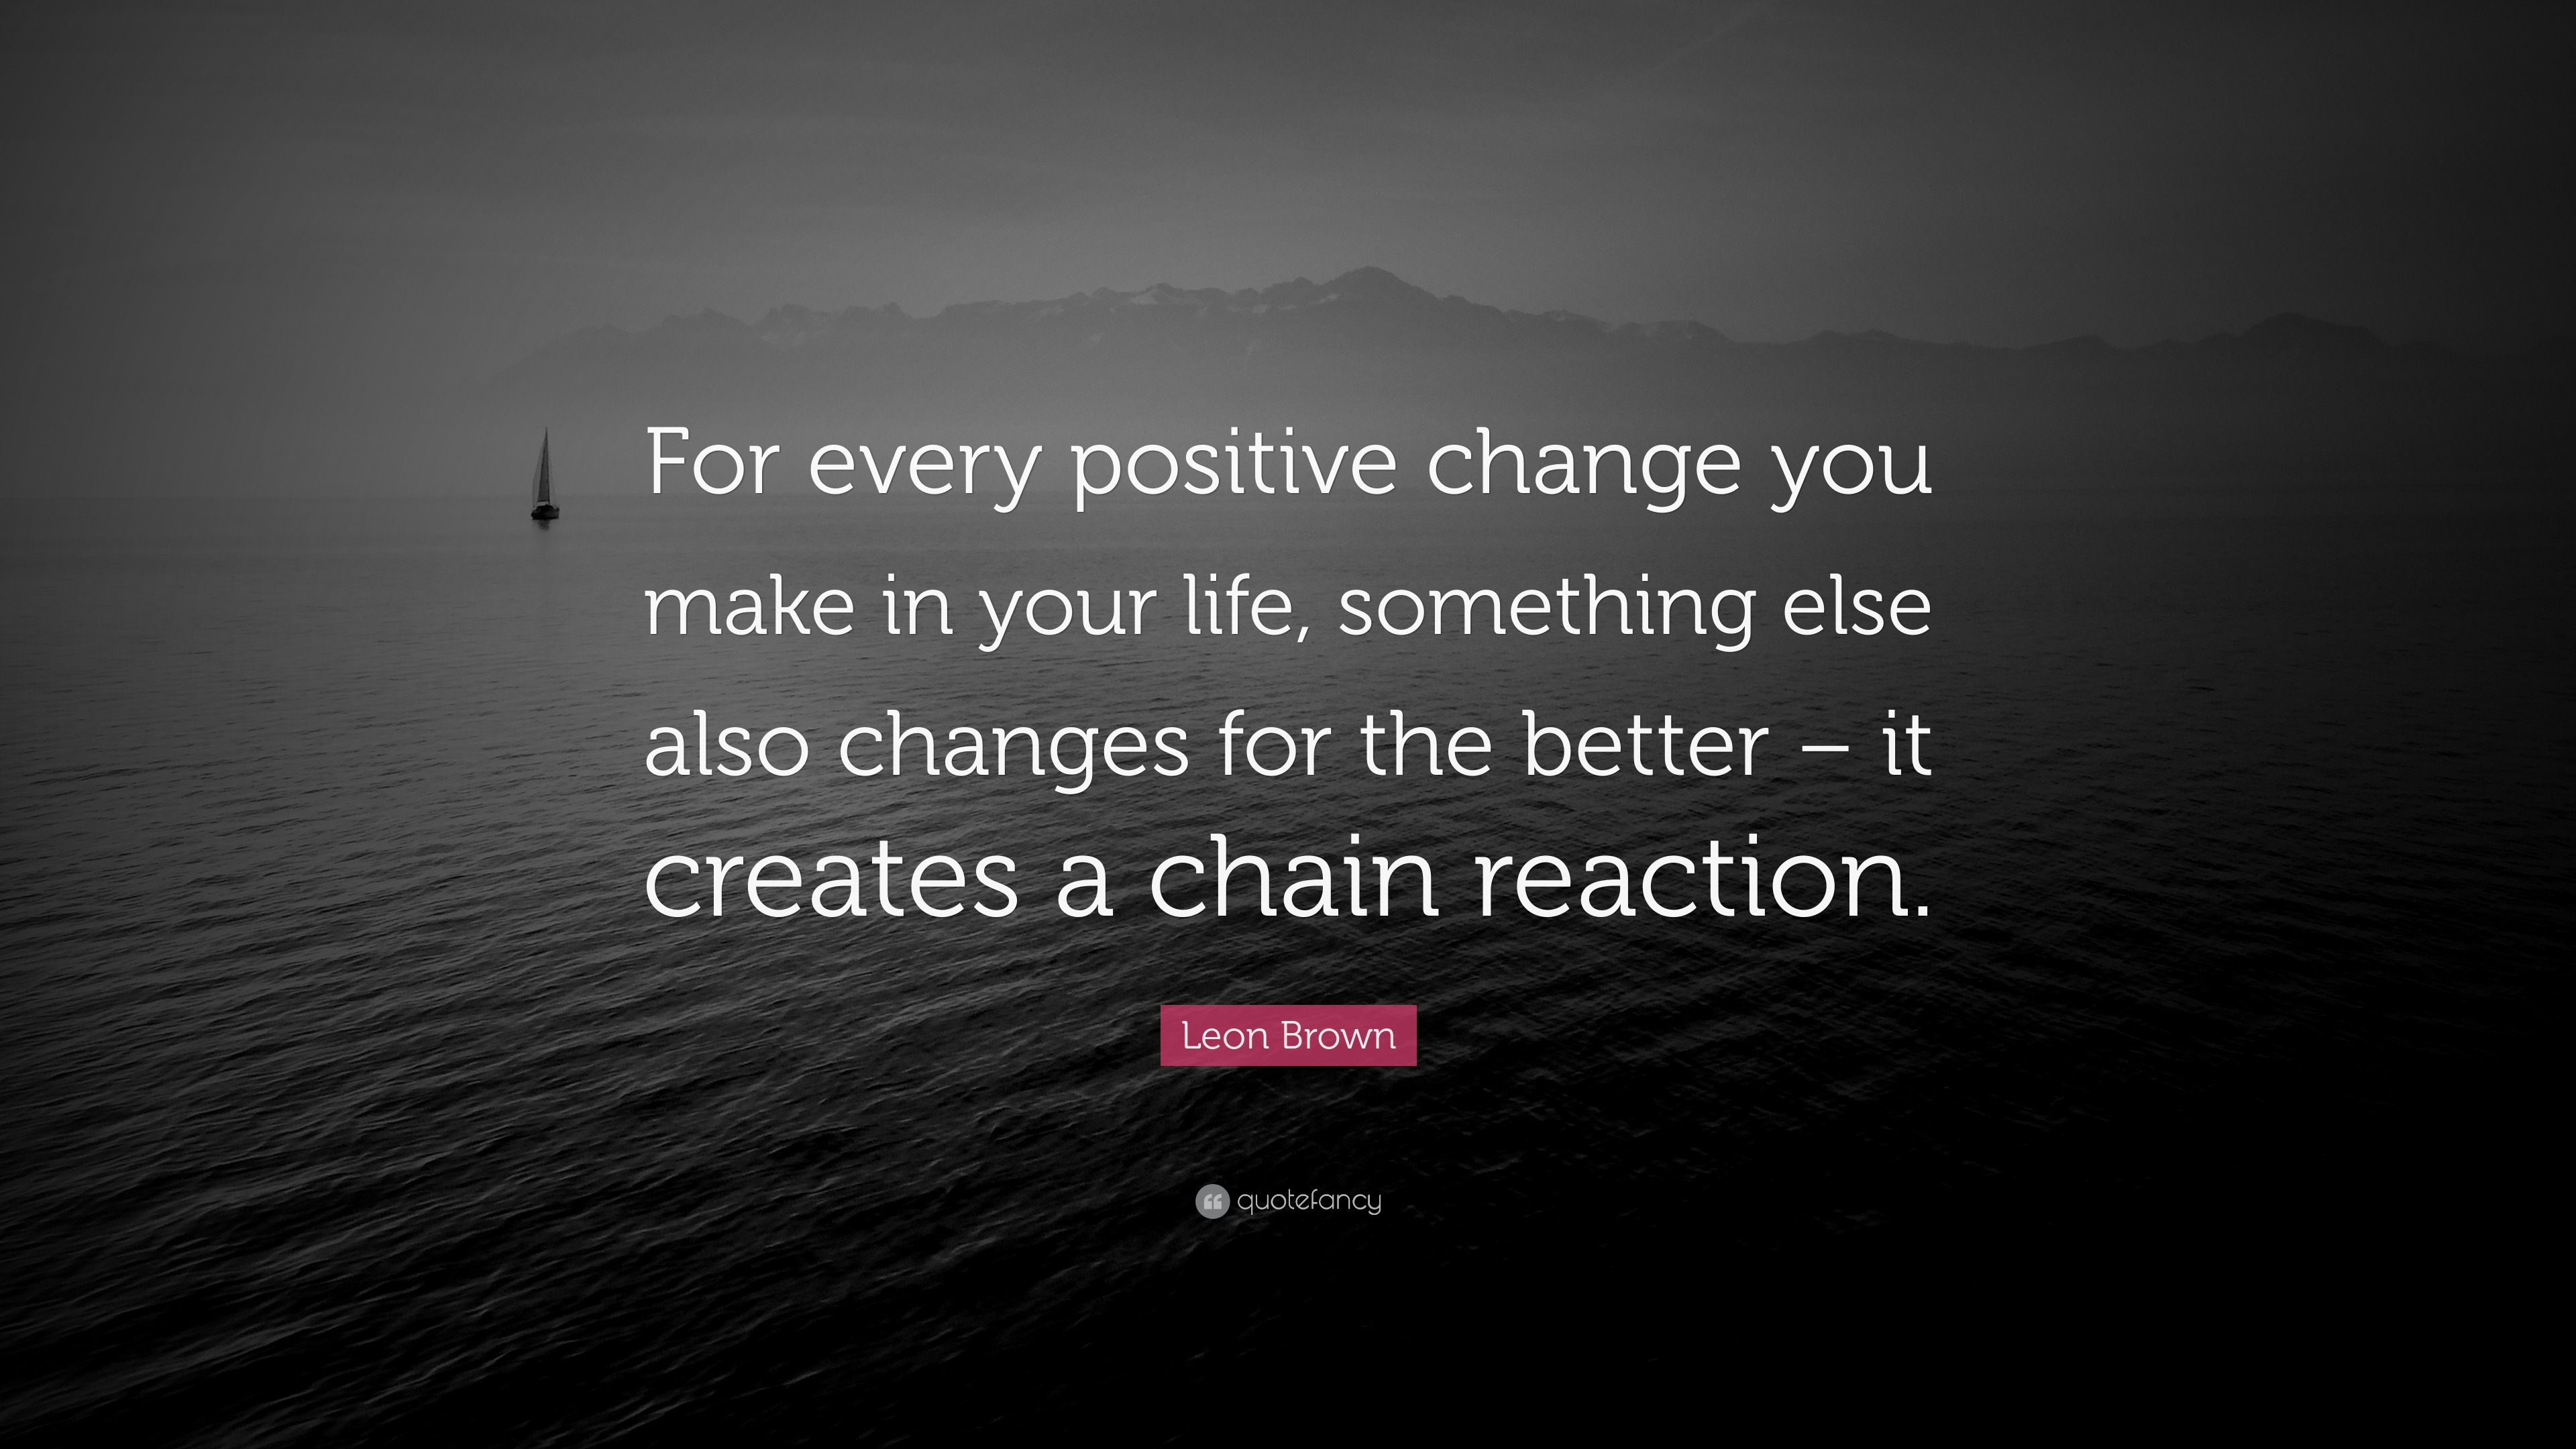 Making Positive Changes In Your Life Quotes | Inspiring Famous Quotes